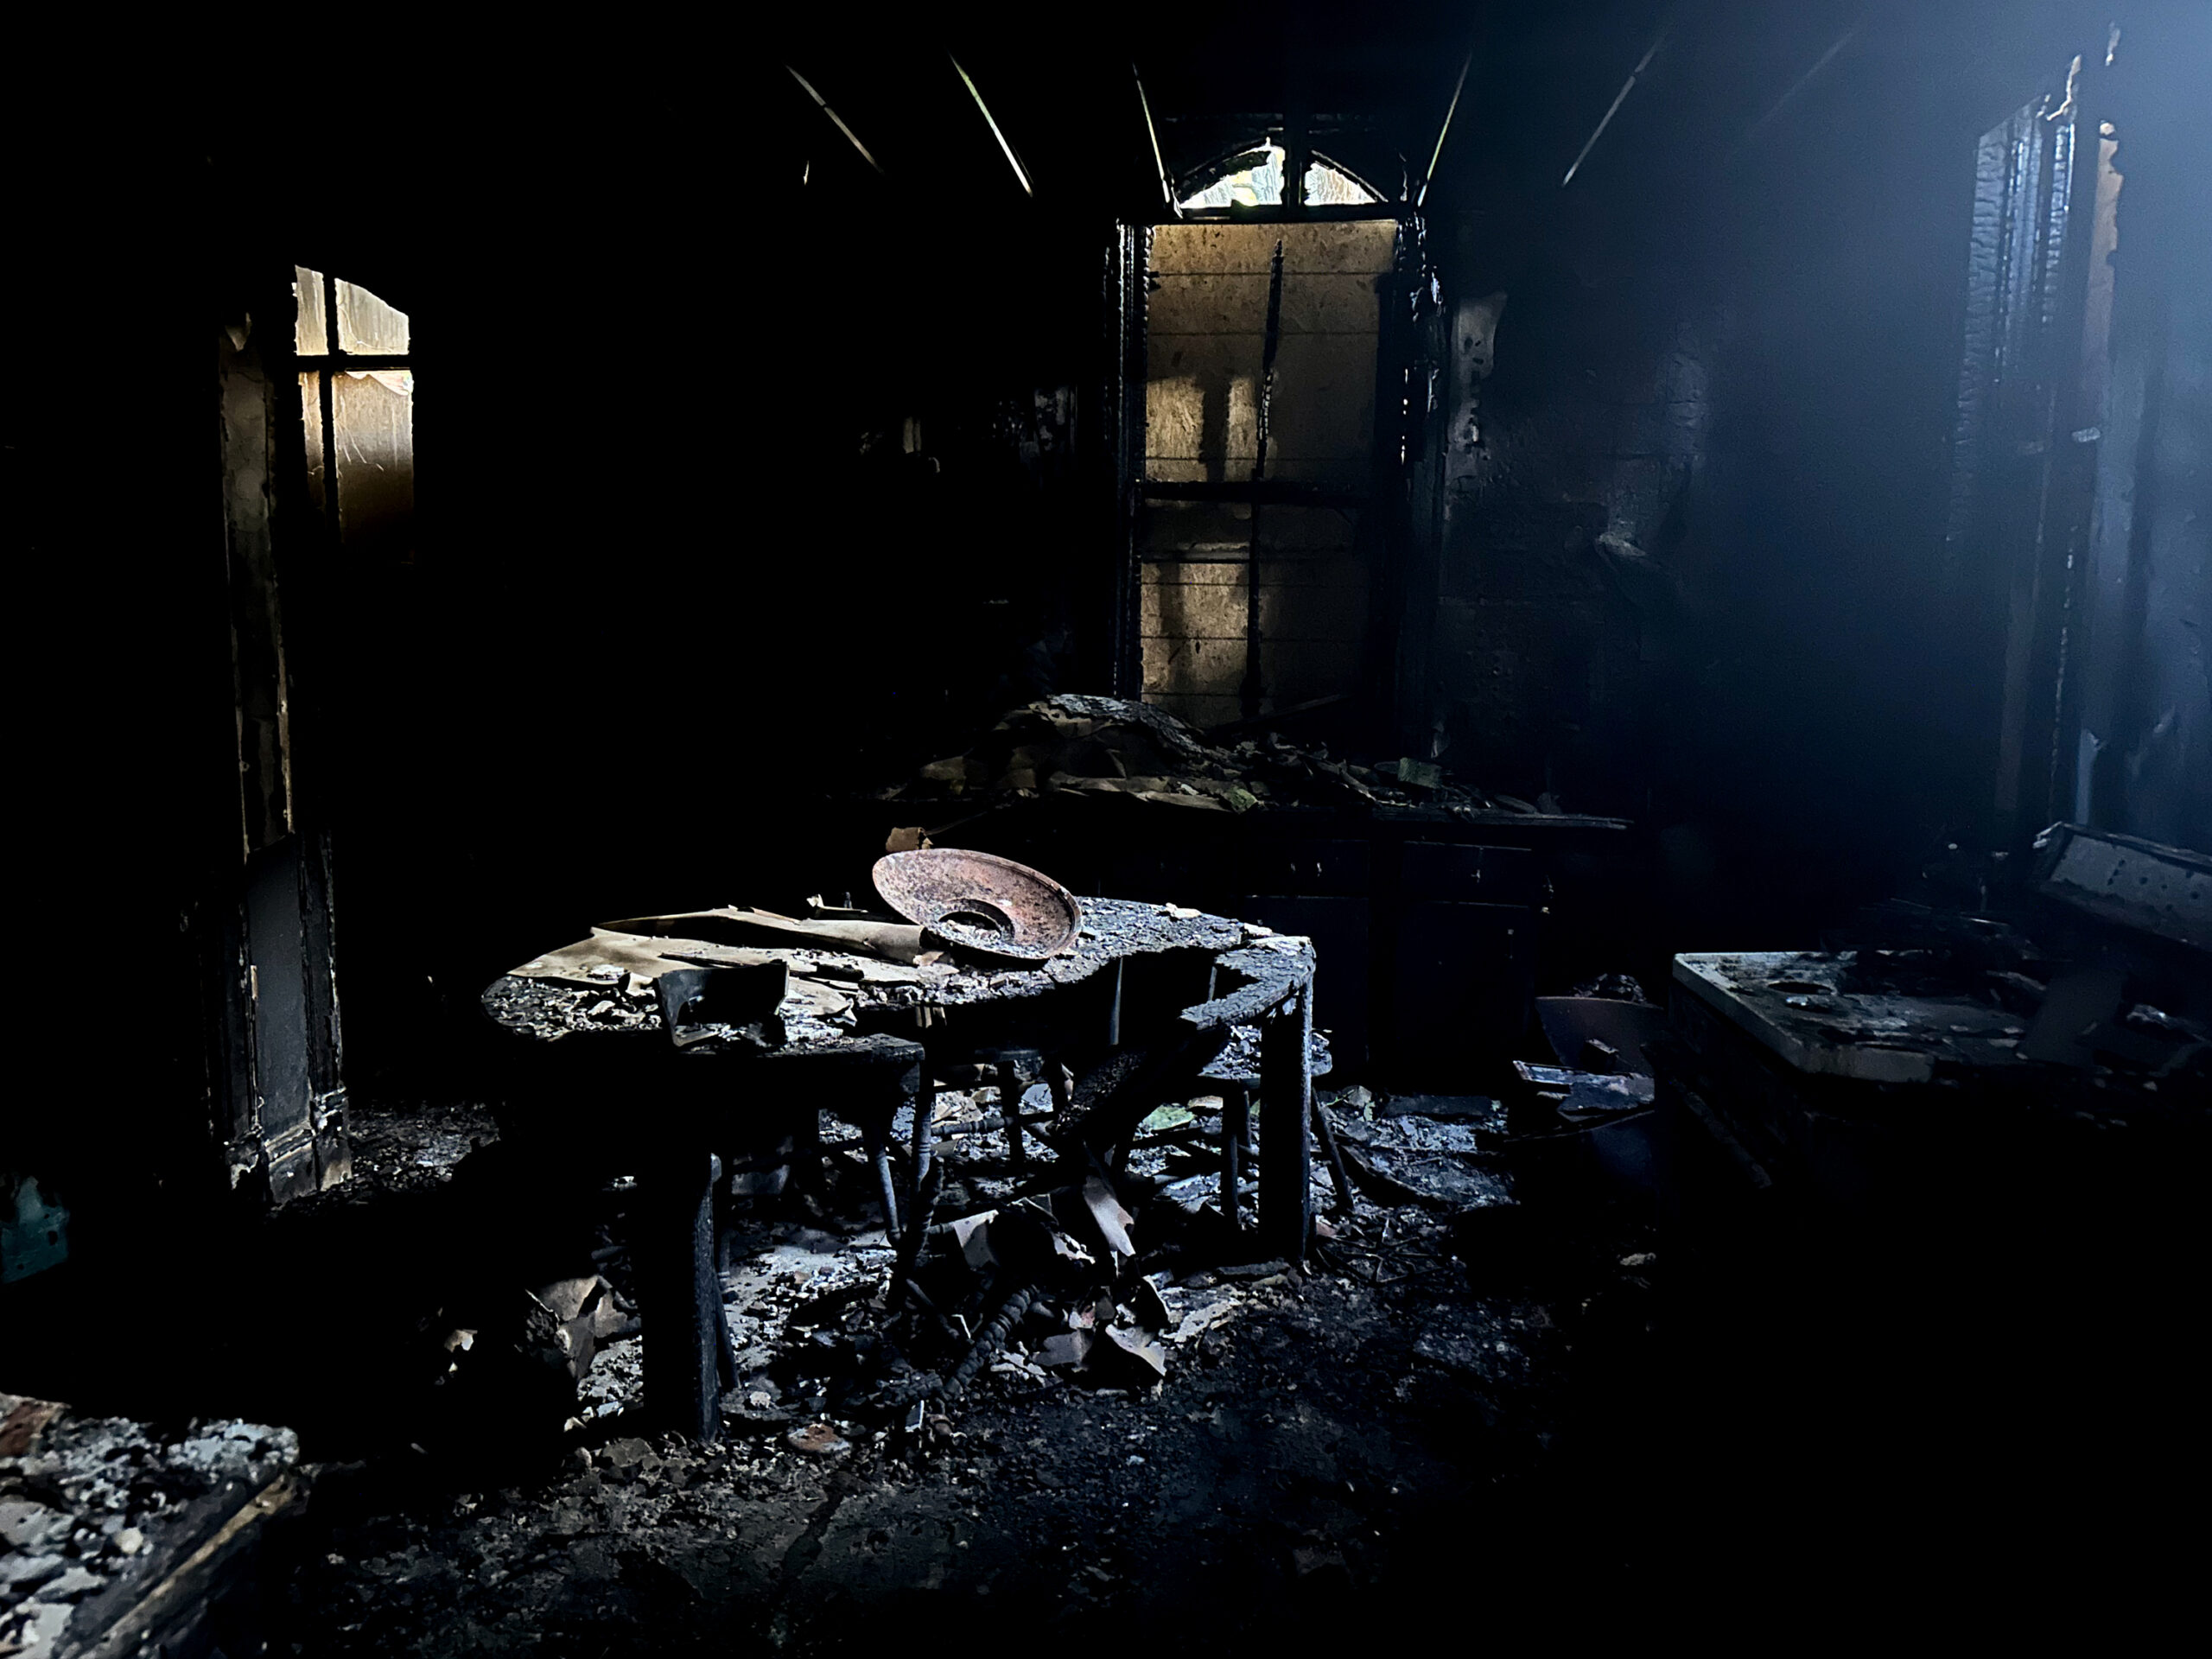 Light falls from a broken window onto the charred remnants of an oven and a kitchen table.